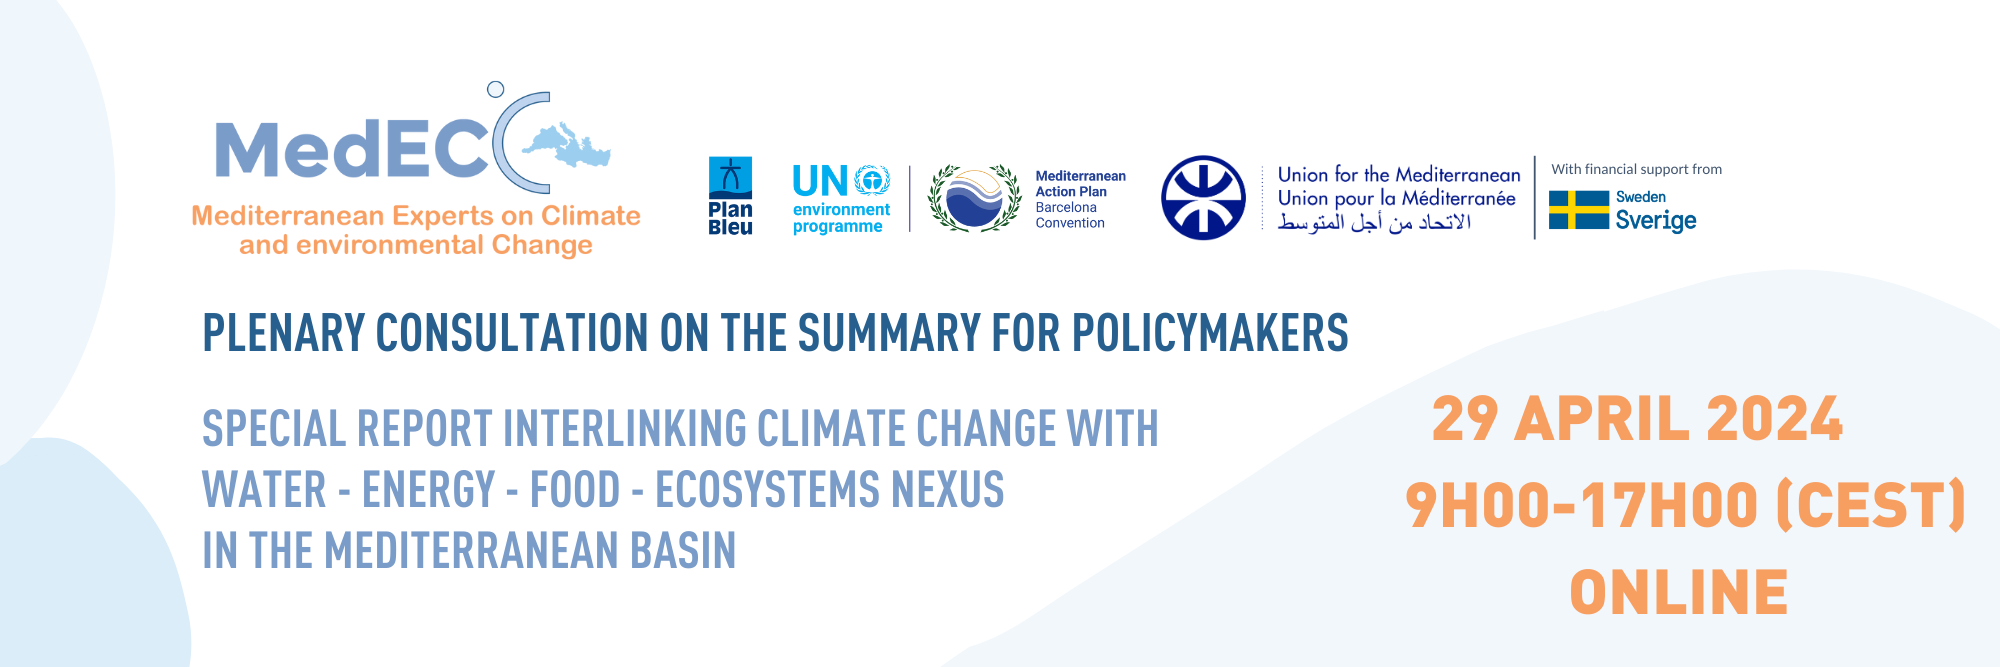 You are currently viewing MedECC Plenary Consultation – Summary for Policymakers, Special Report interlinking climate with WEFE nexus in the Mediterranean Basin